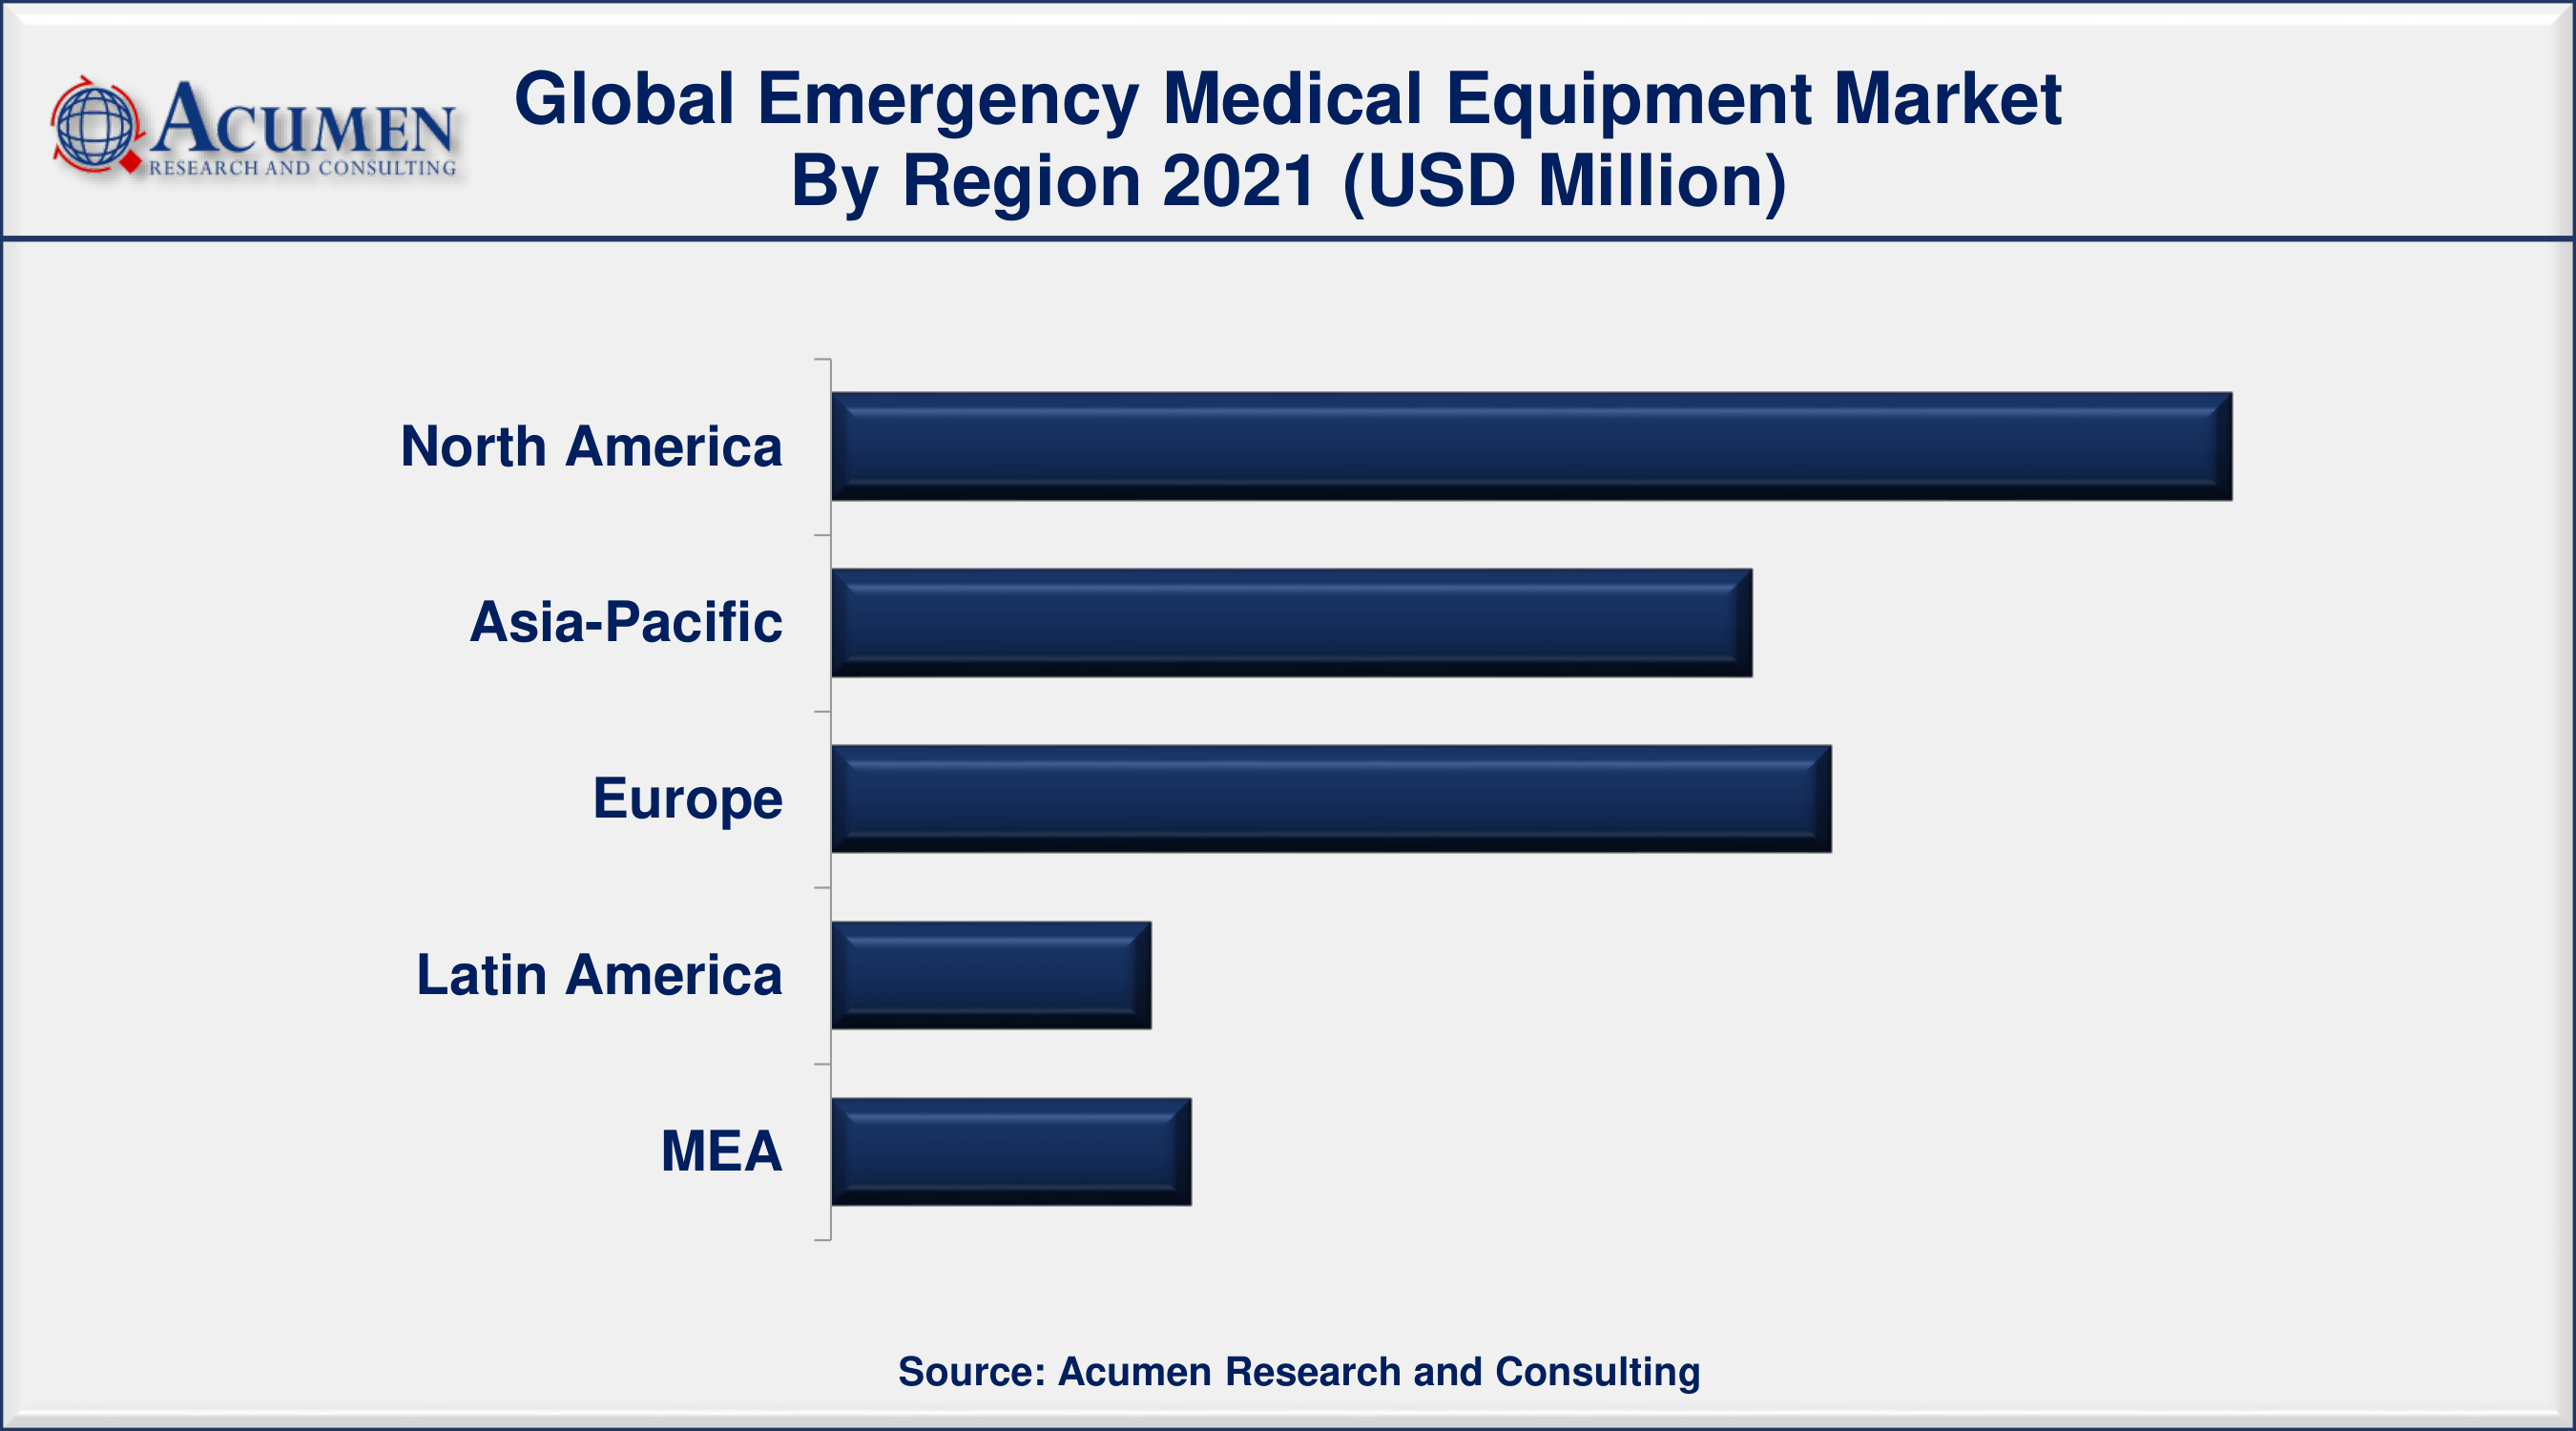 Among end-user, hospital sector occupied more than 45% of the total market share